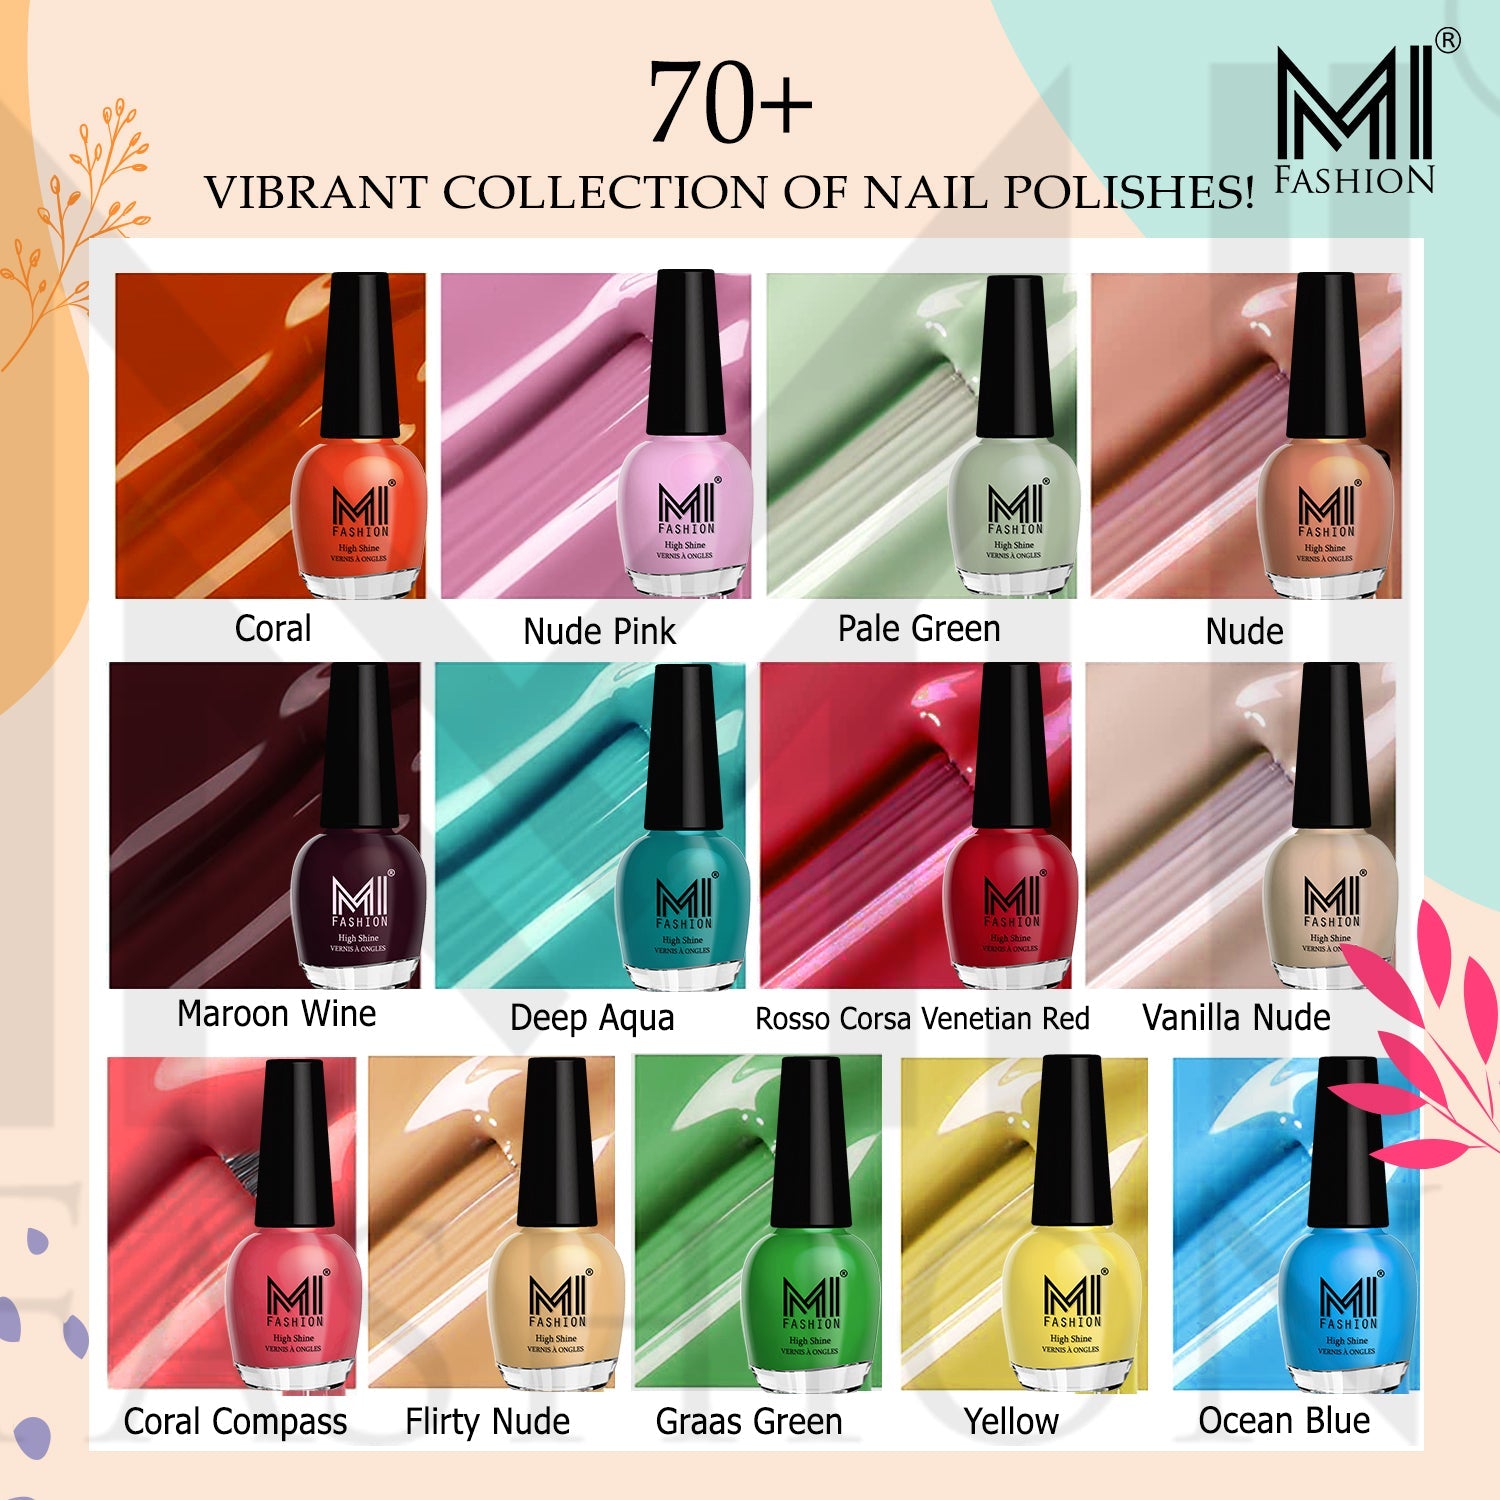 OMG Glow-In-The-Dark Nail Polish Set 6 Colors Ages 3 & Up | Mix & Match  Colors | www.visionbound.com